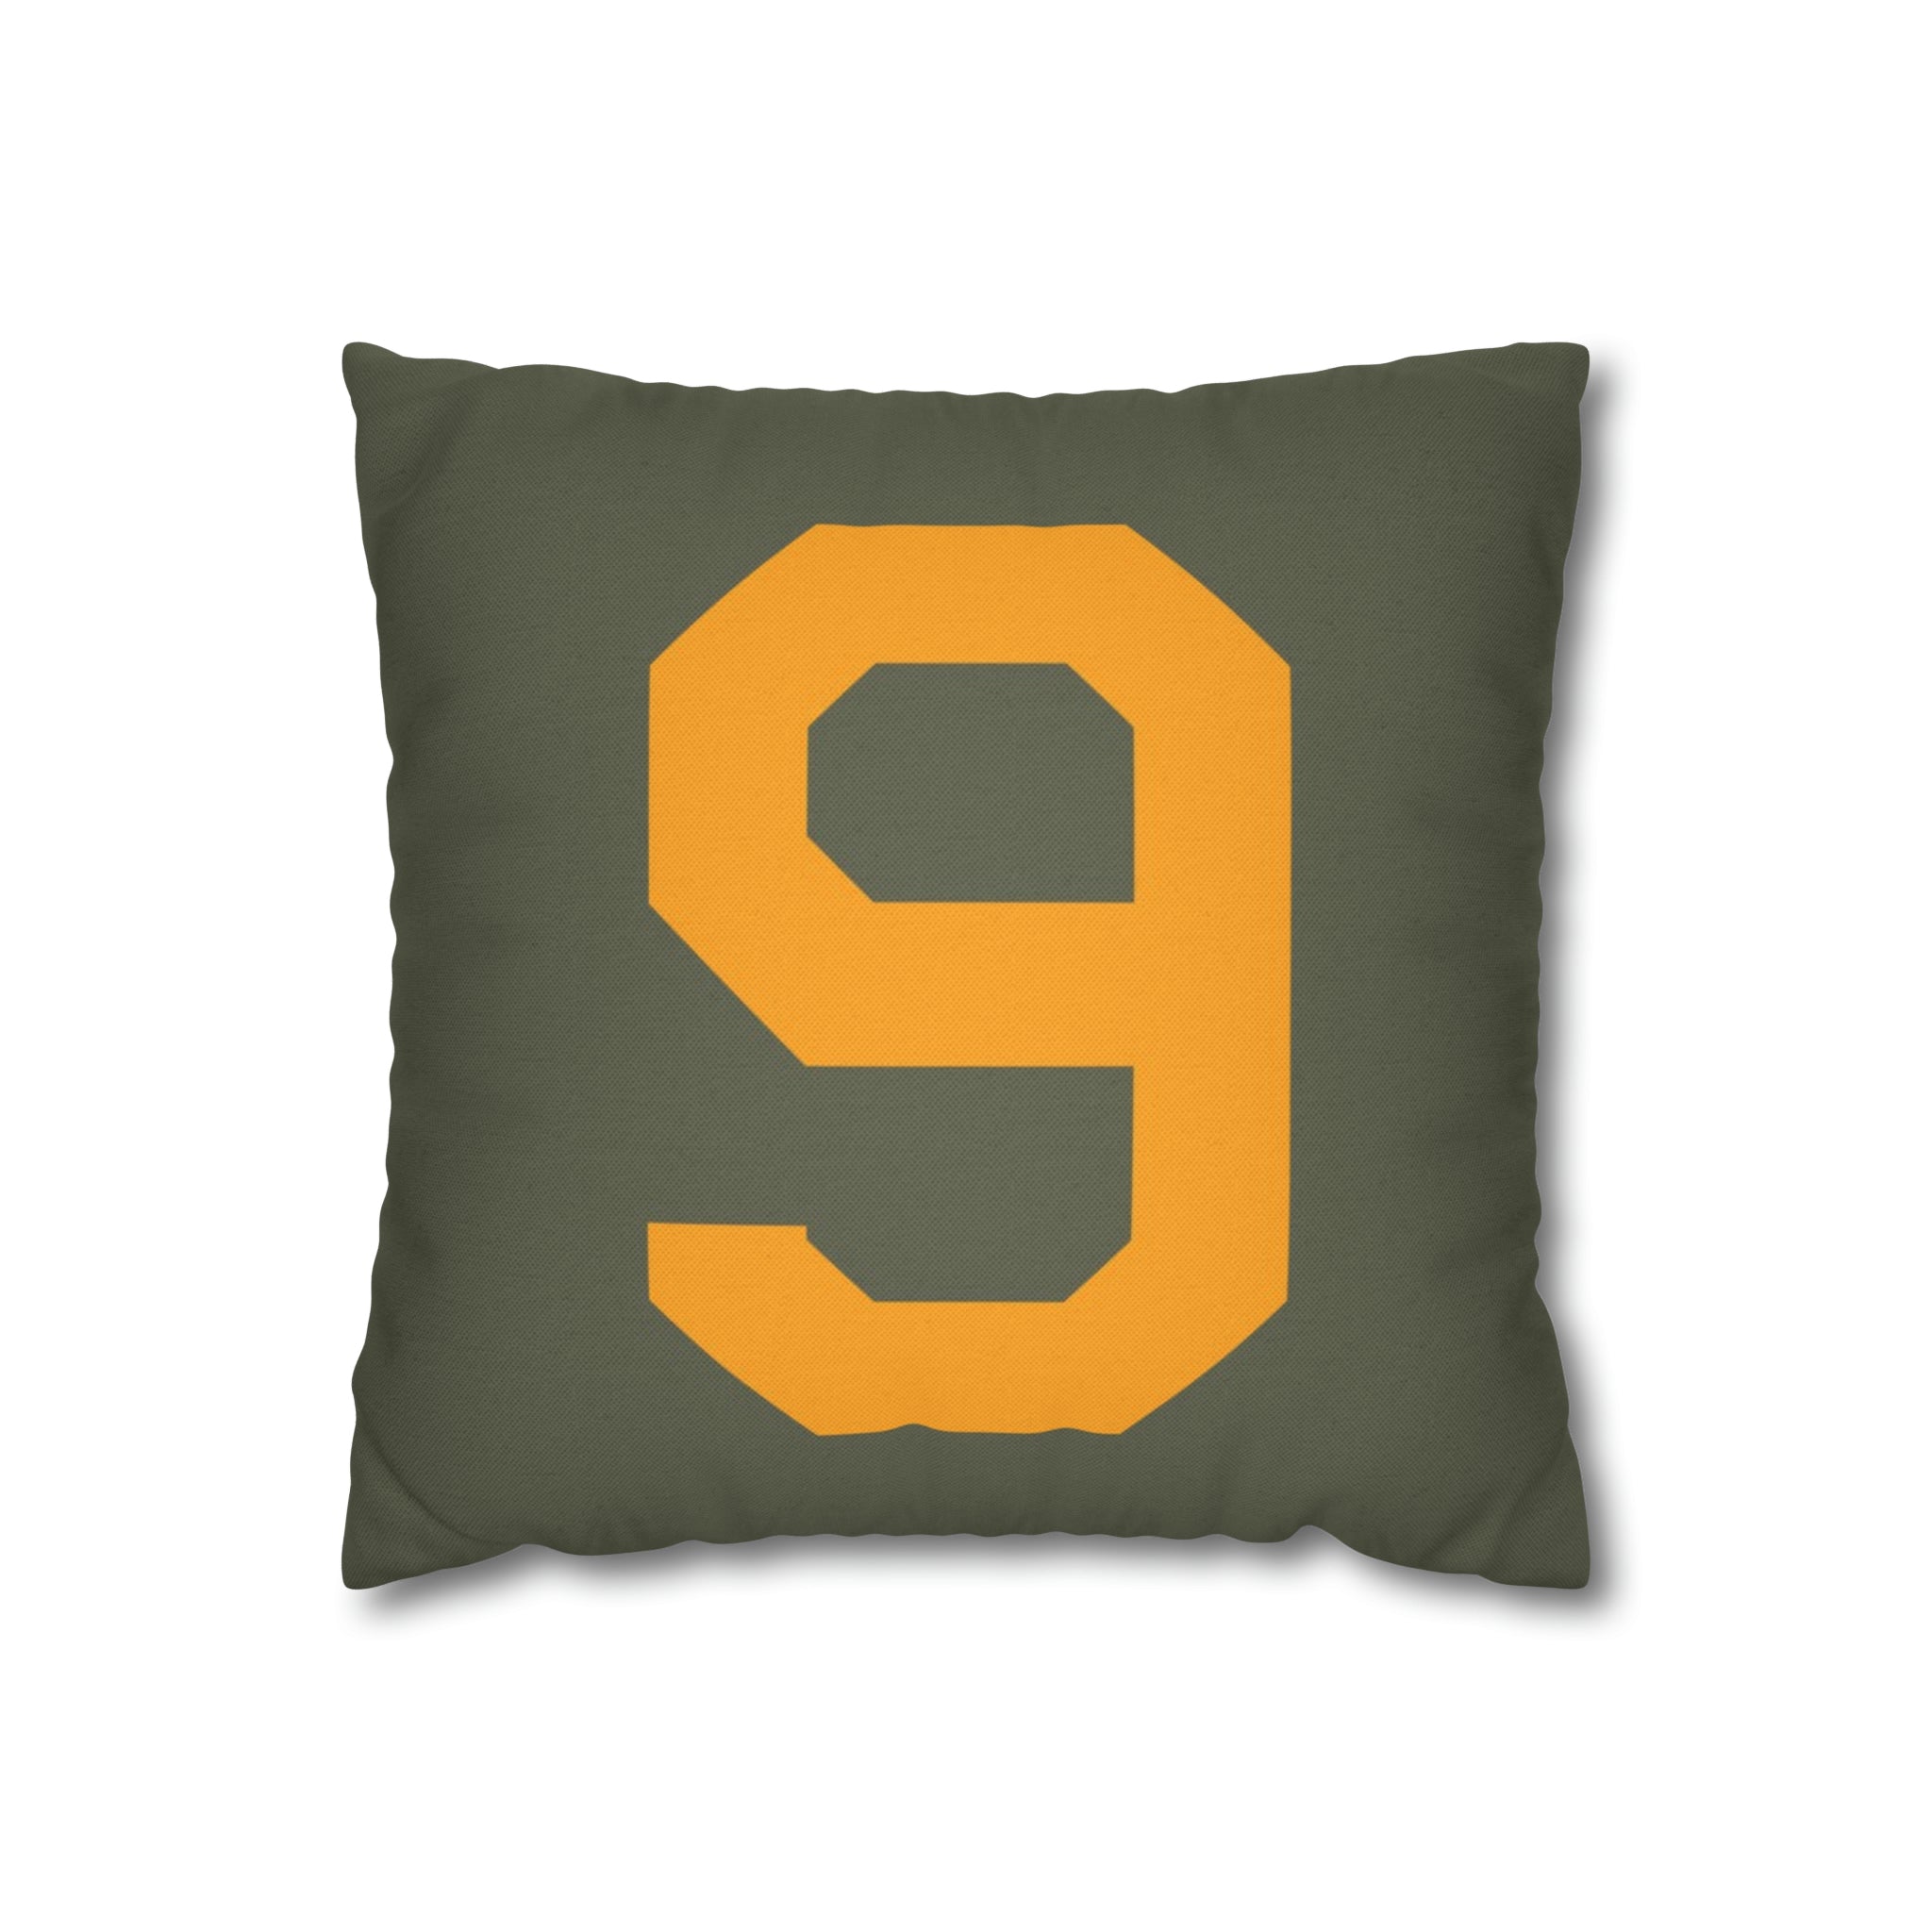 WWII USAAF Number "9" Square Pillowcase - I Love a Hangar